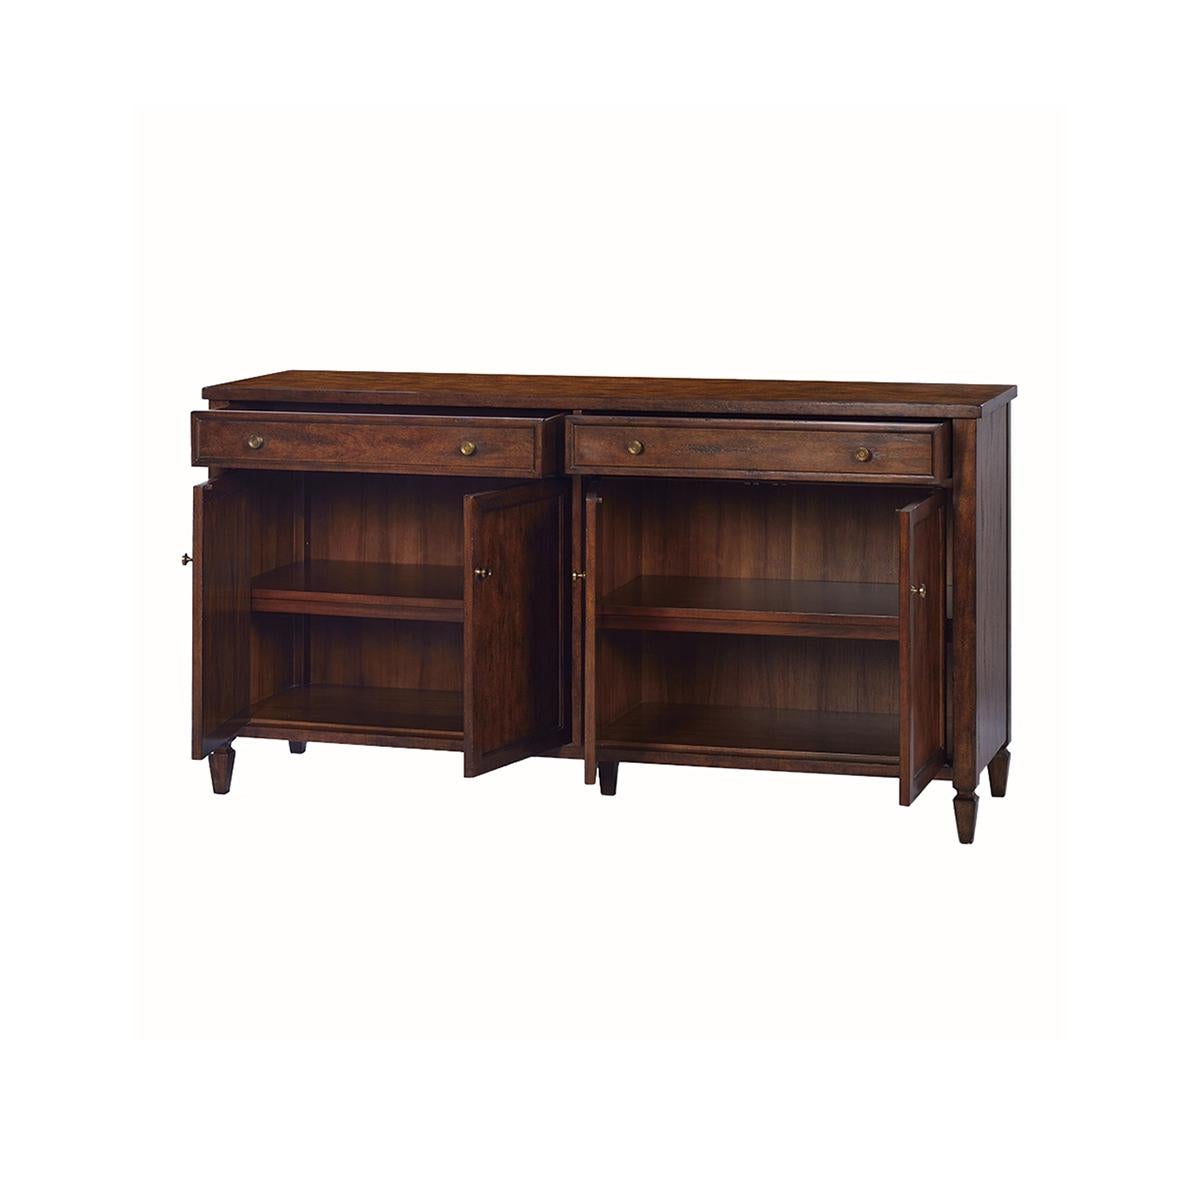 With a warm 'rustic' antiqued brown finish. The sideboard has two wide drawers over two pairs of panel doors, shelves, burnished brass hardware, a smooth top, and a finish with subtle visual distressing.

Dimensions: 64